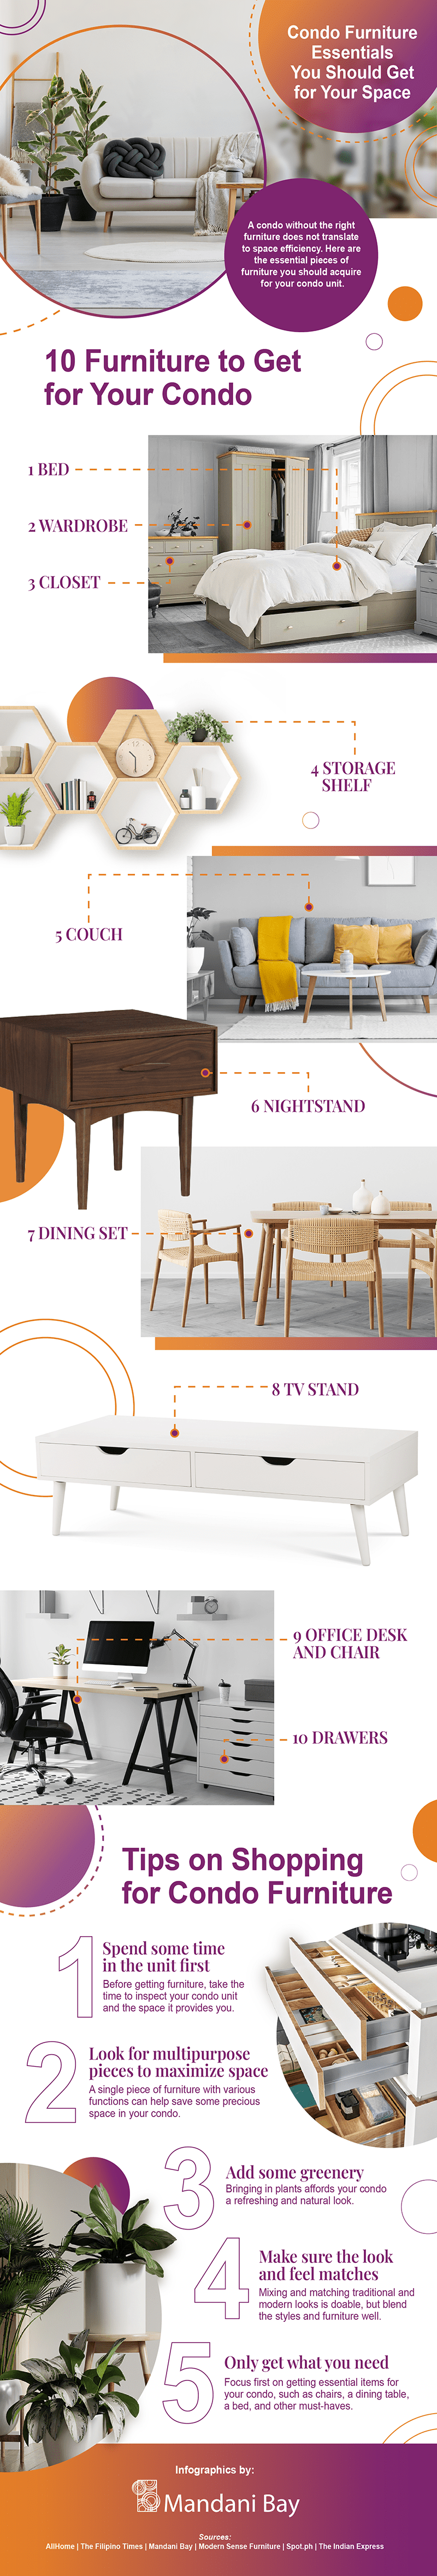 Infographic on Condo Furniture Essentials You Should Get for Your Space